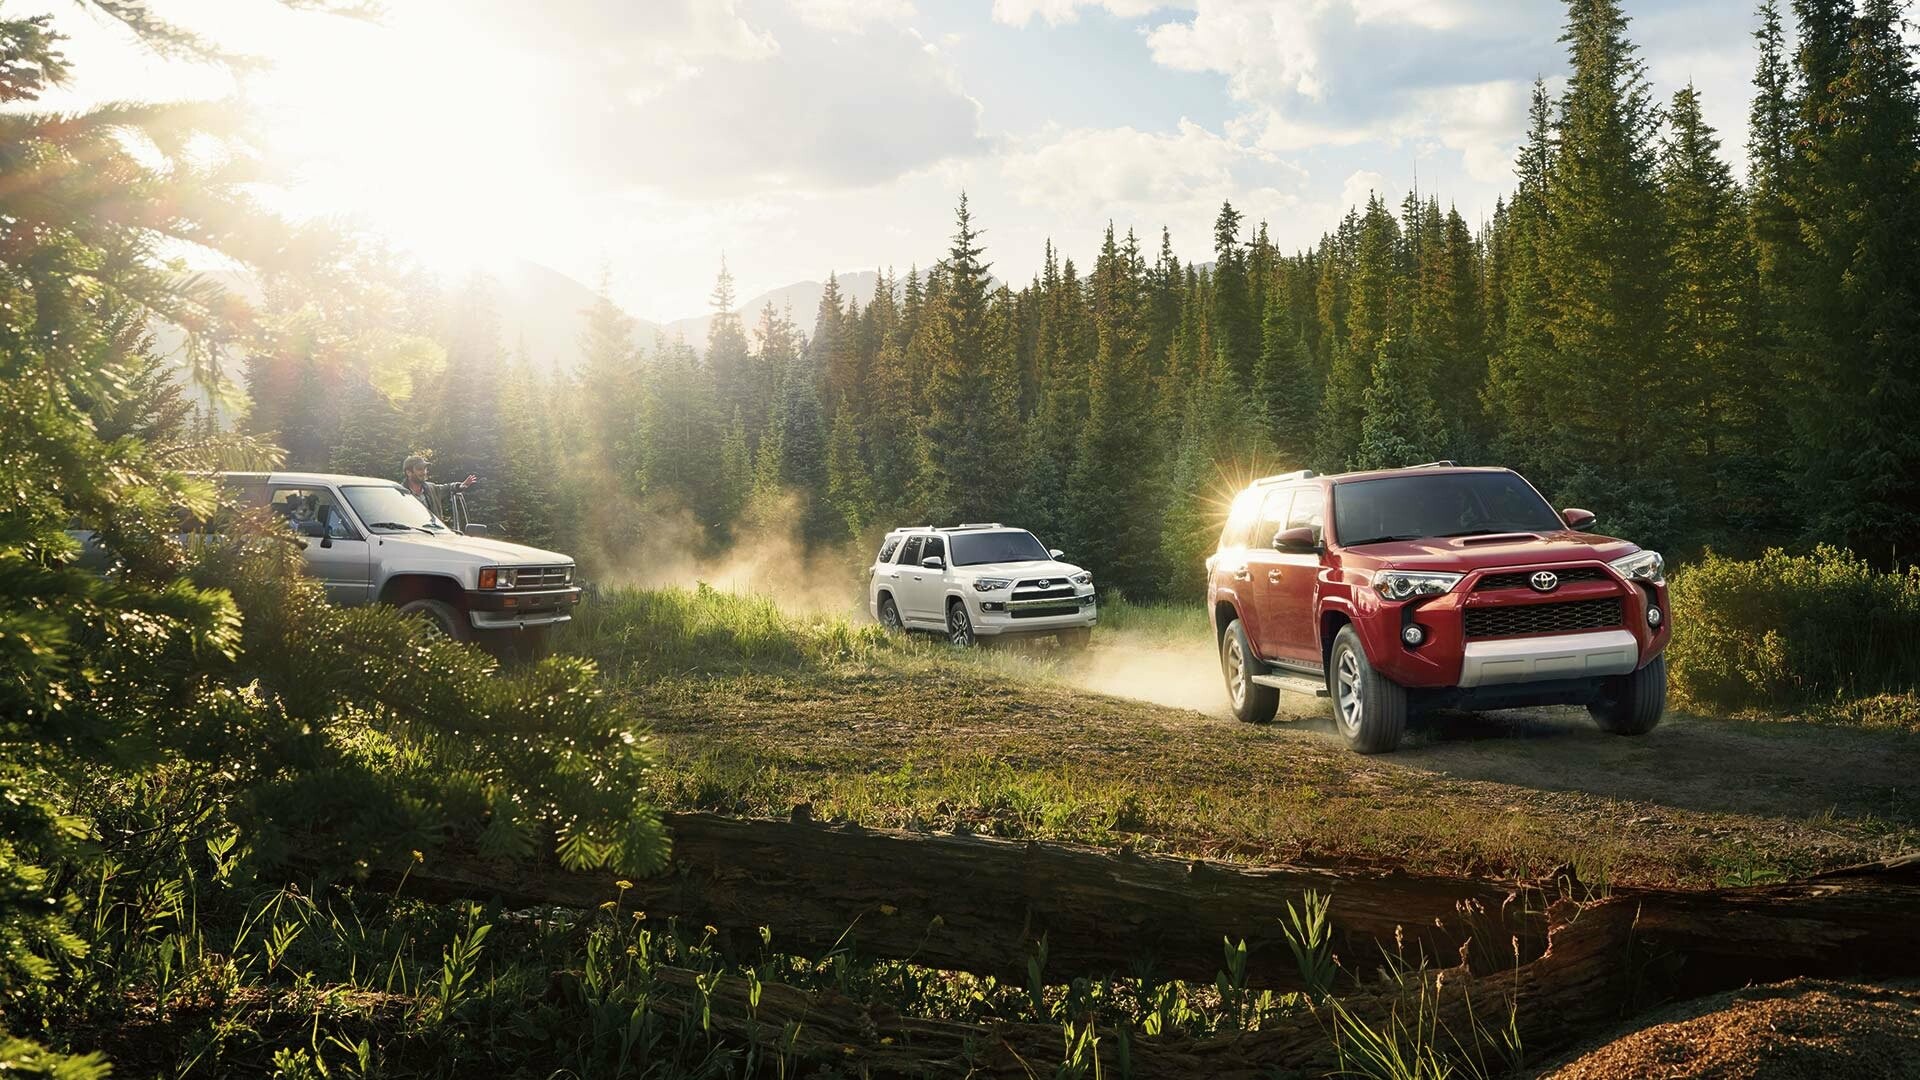 Toyota: 4Runner, An SUV manufactured by the Japanese automaker. 1920x1080 Full HD Wallpaper.